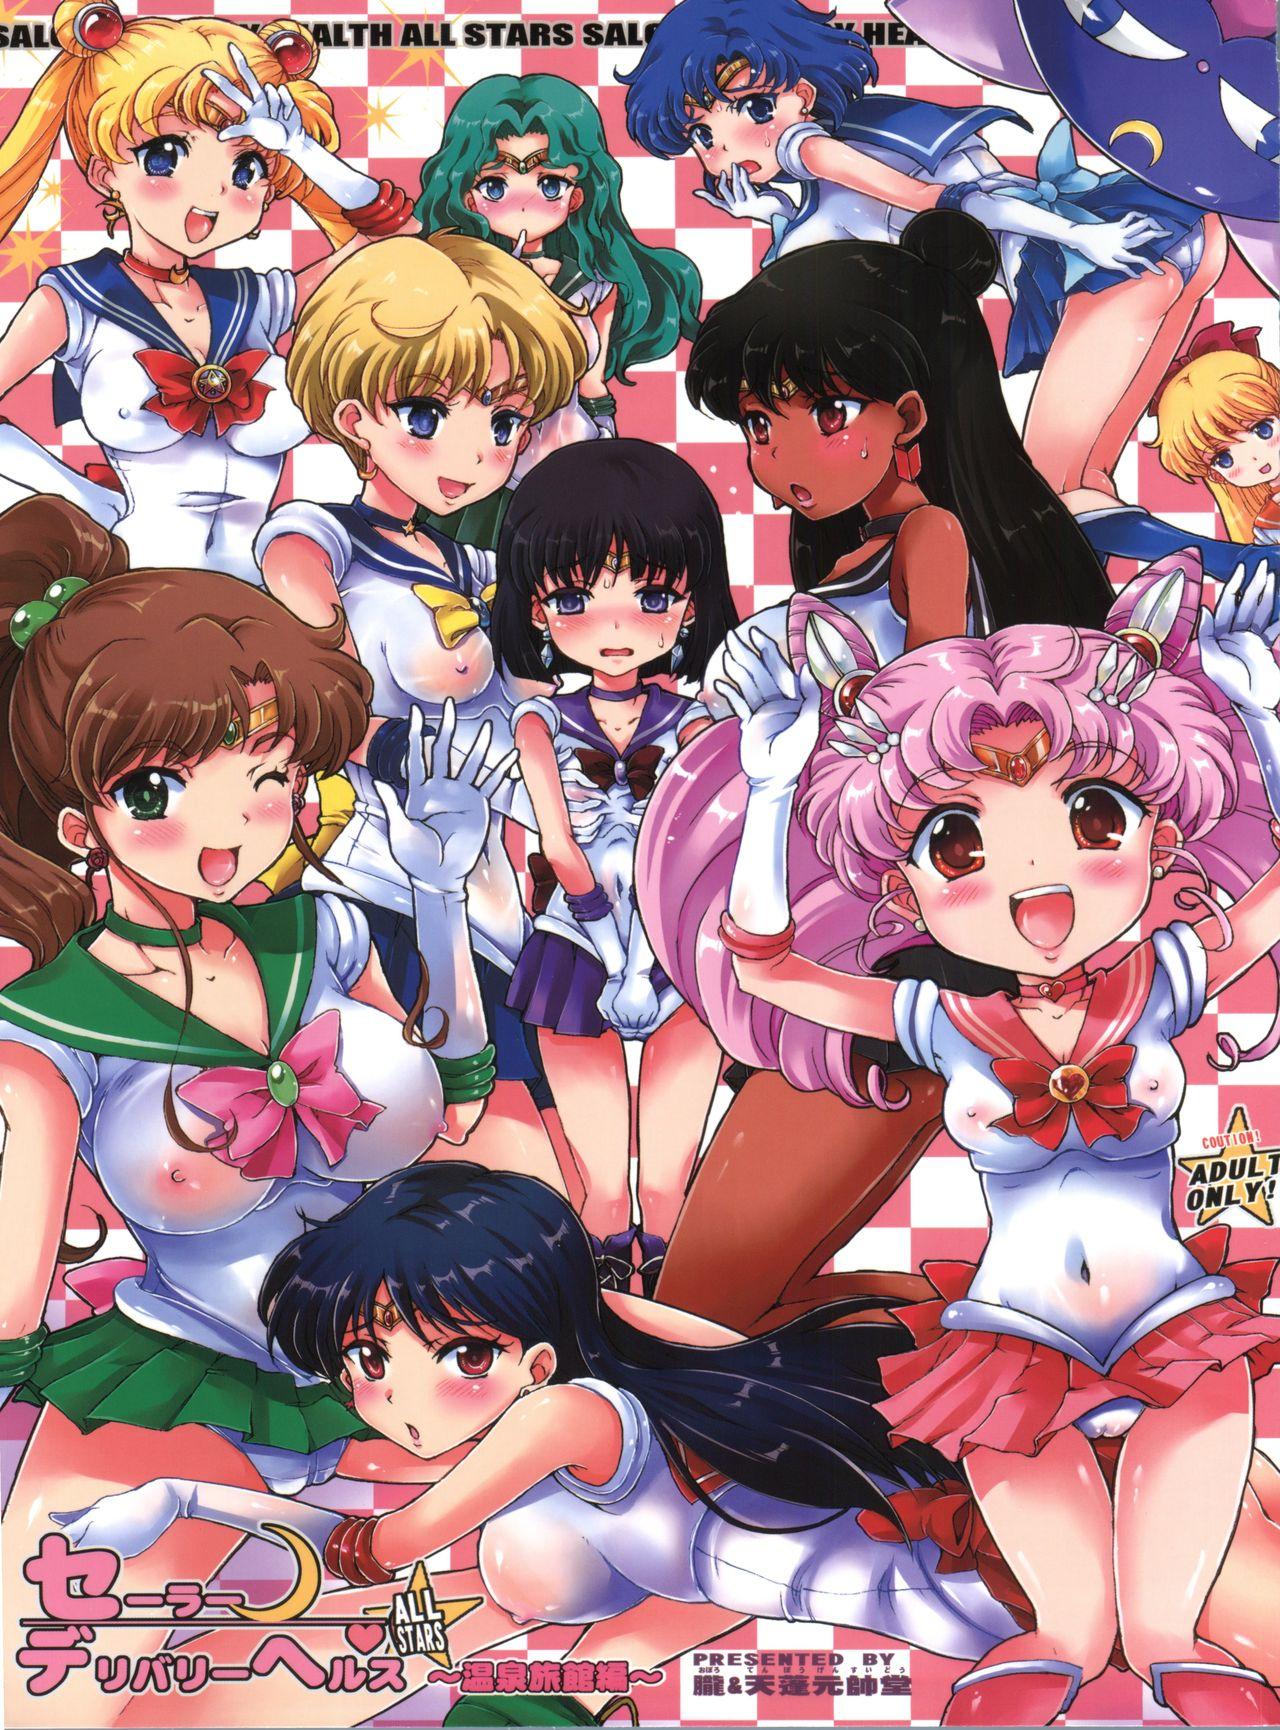 Sailor Delivery Health All Stars 0